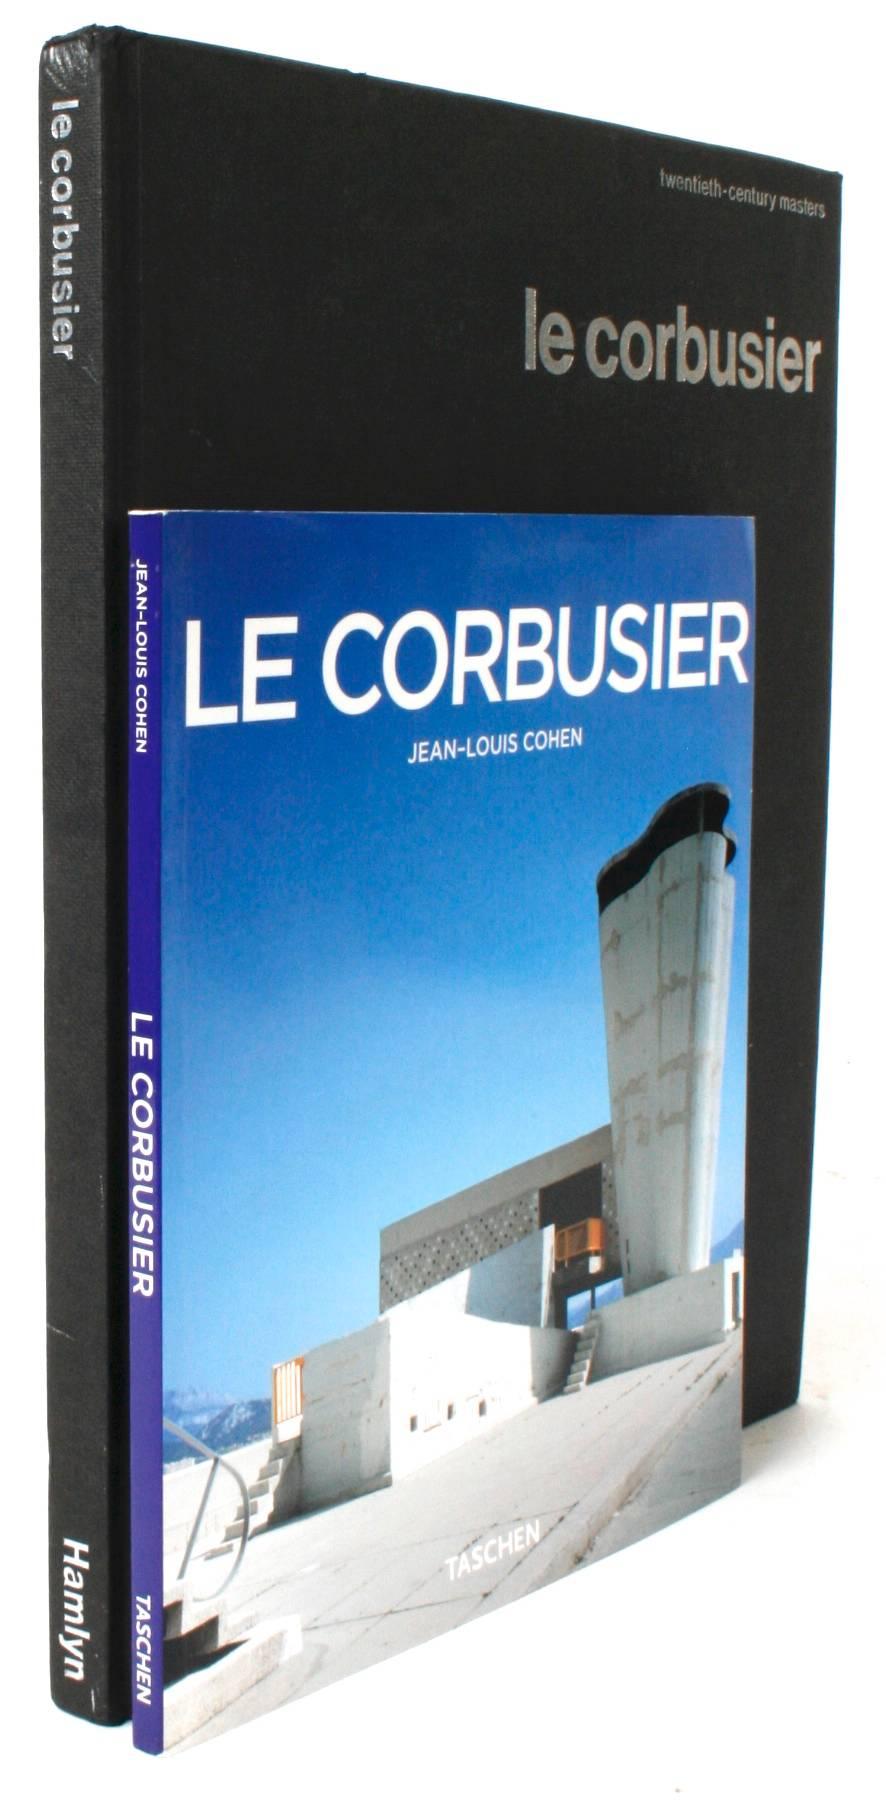 Two Books on Le Corbusier. 1.) Le Corbusier 1887-1965 The Lyricism of Architecture in the Machine Age by Jean-Louis Cohen. Köln: Taschen, 2004. Softcover. 96 pp. A book on the life and work of Charles-Edouard Jeanneret, Le Corbusier, that shows his